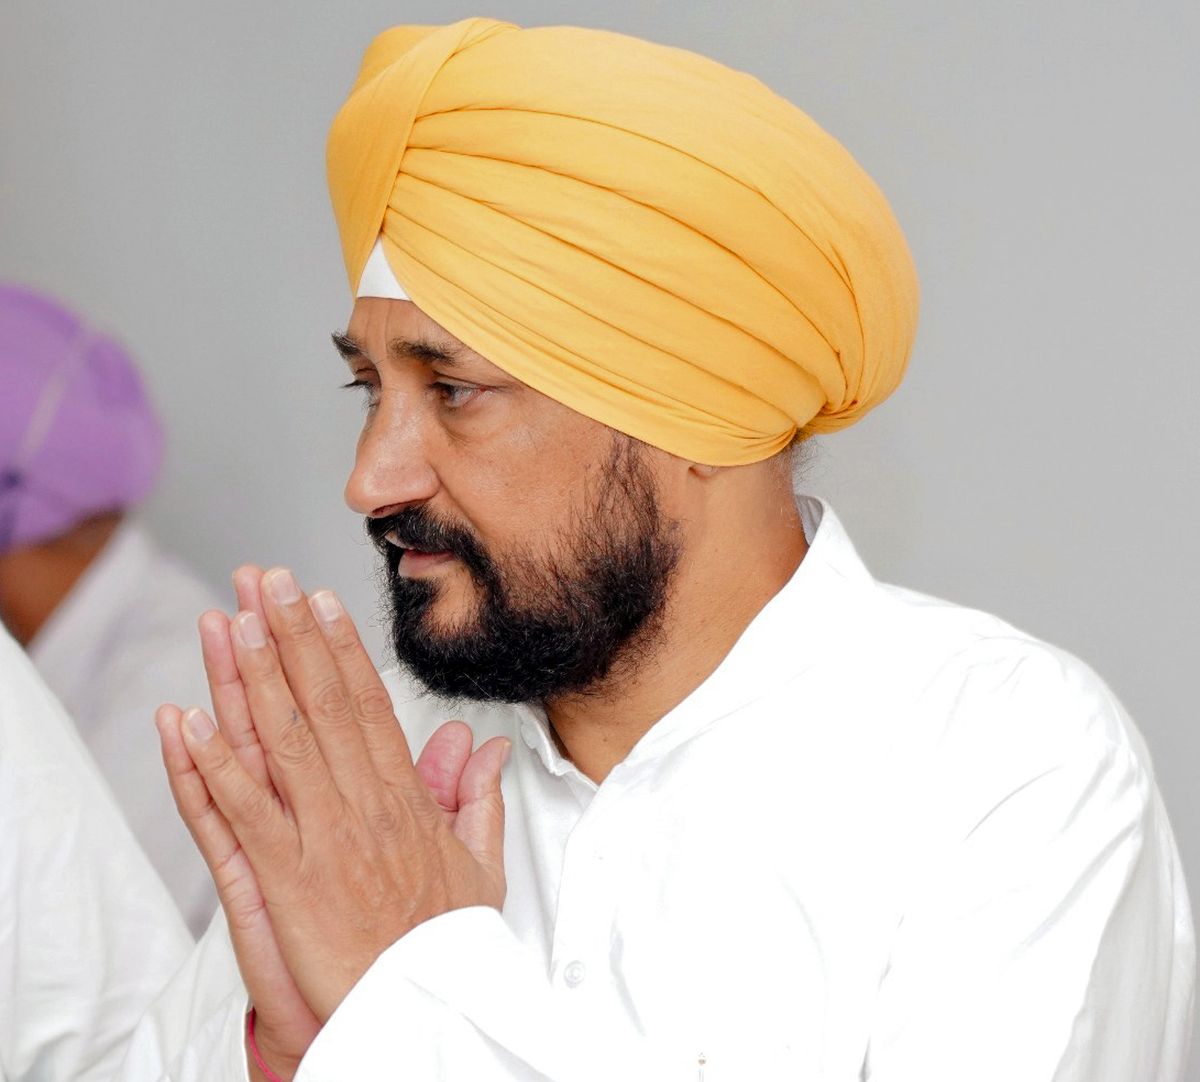 I may be poor but not weak: Channi's retort to Sidhu